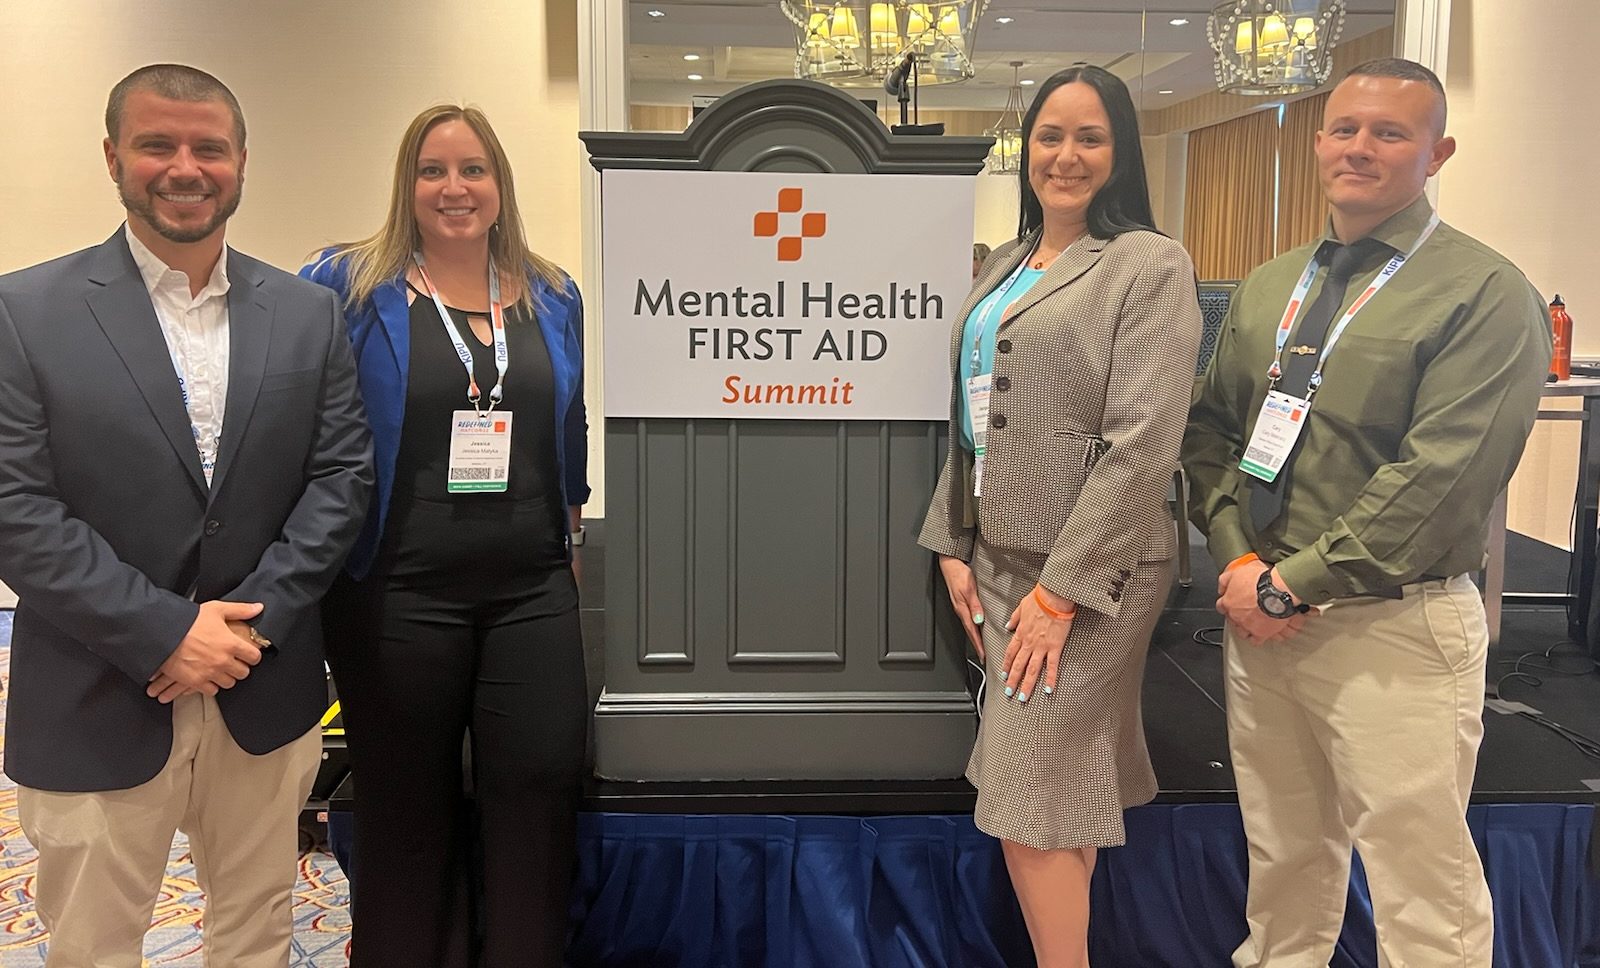 The Rushford Meriden Opioid Referral for Recovery (MORR) team presented three times at the 2022 National Council for Mental Wellbeing Conference in Washington, DC. (pictured LtoR) John Potter, LCSW Clinical Manager; Jessica Matyka, LCSW Clinical Director; Jacqueline Rodriguez, BA Peer support specialist; Sgt Cary Maikranz, Meriden Police Department.